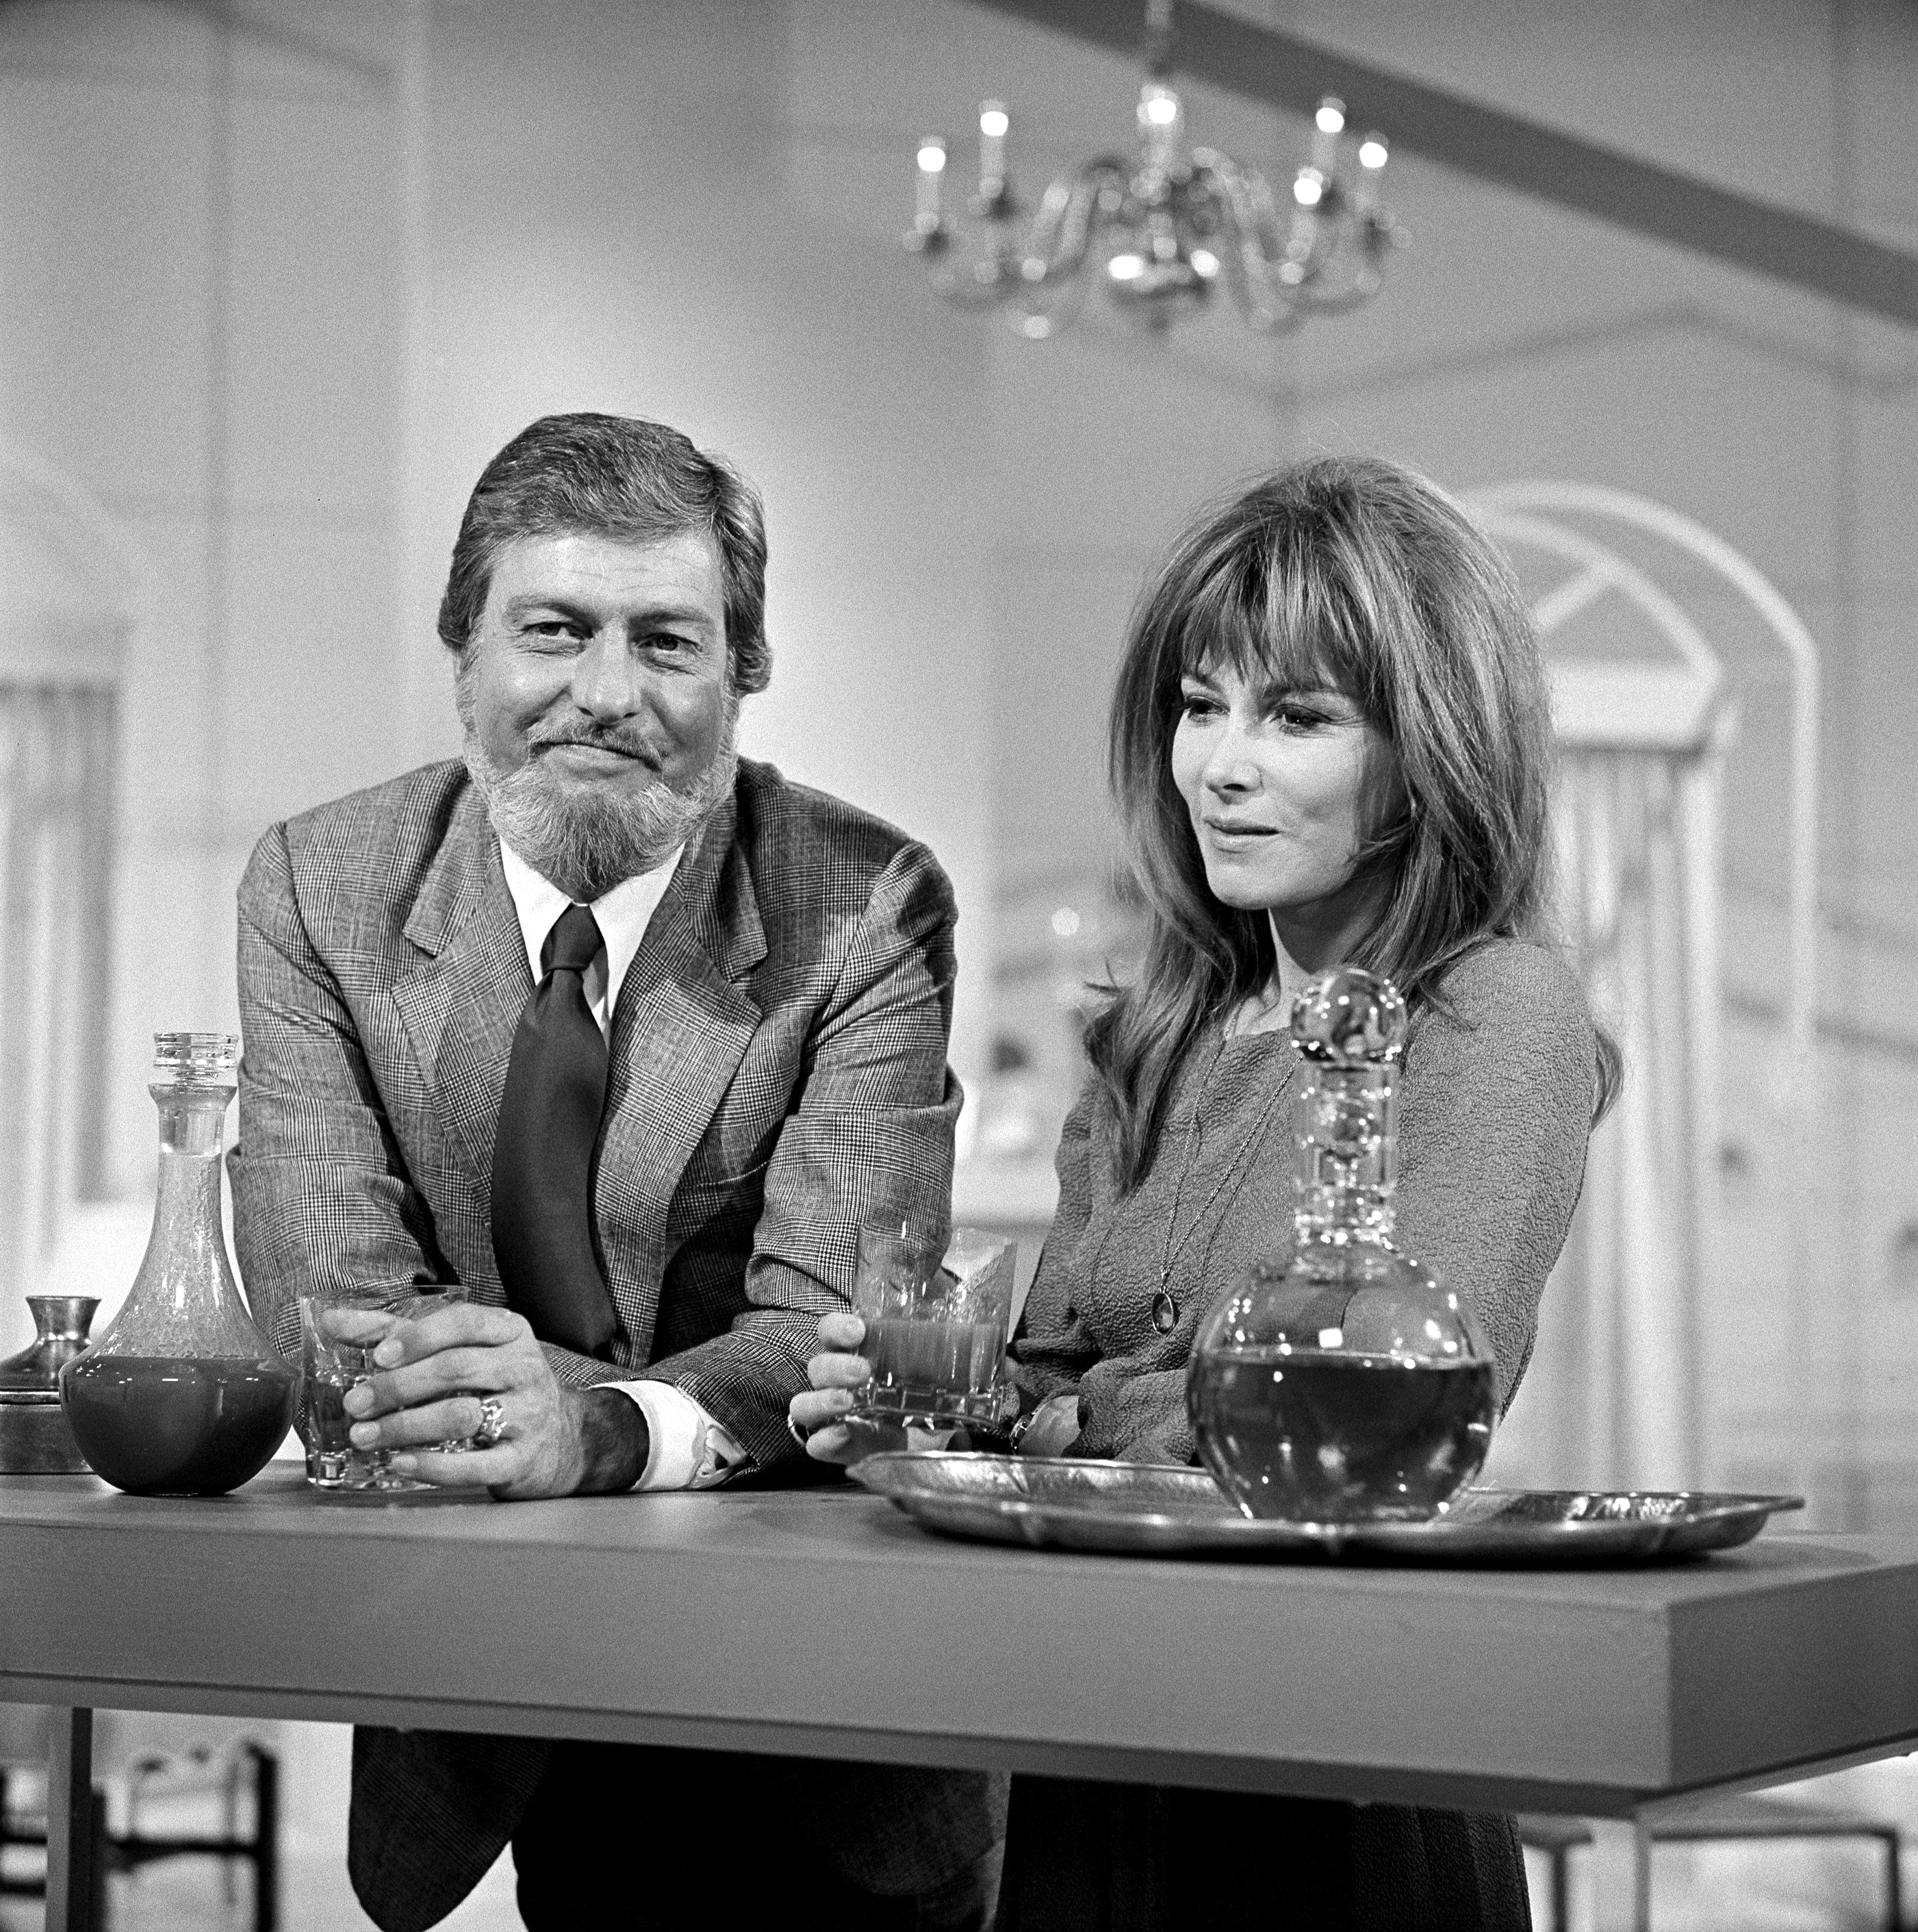 Dick Van Dyke and Lee Grant. Image dated December 8, 1970. | Source: Getty Images